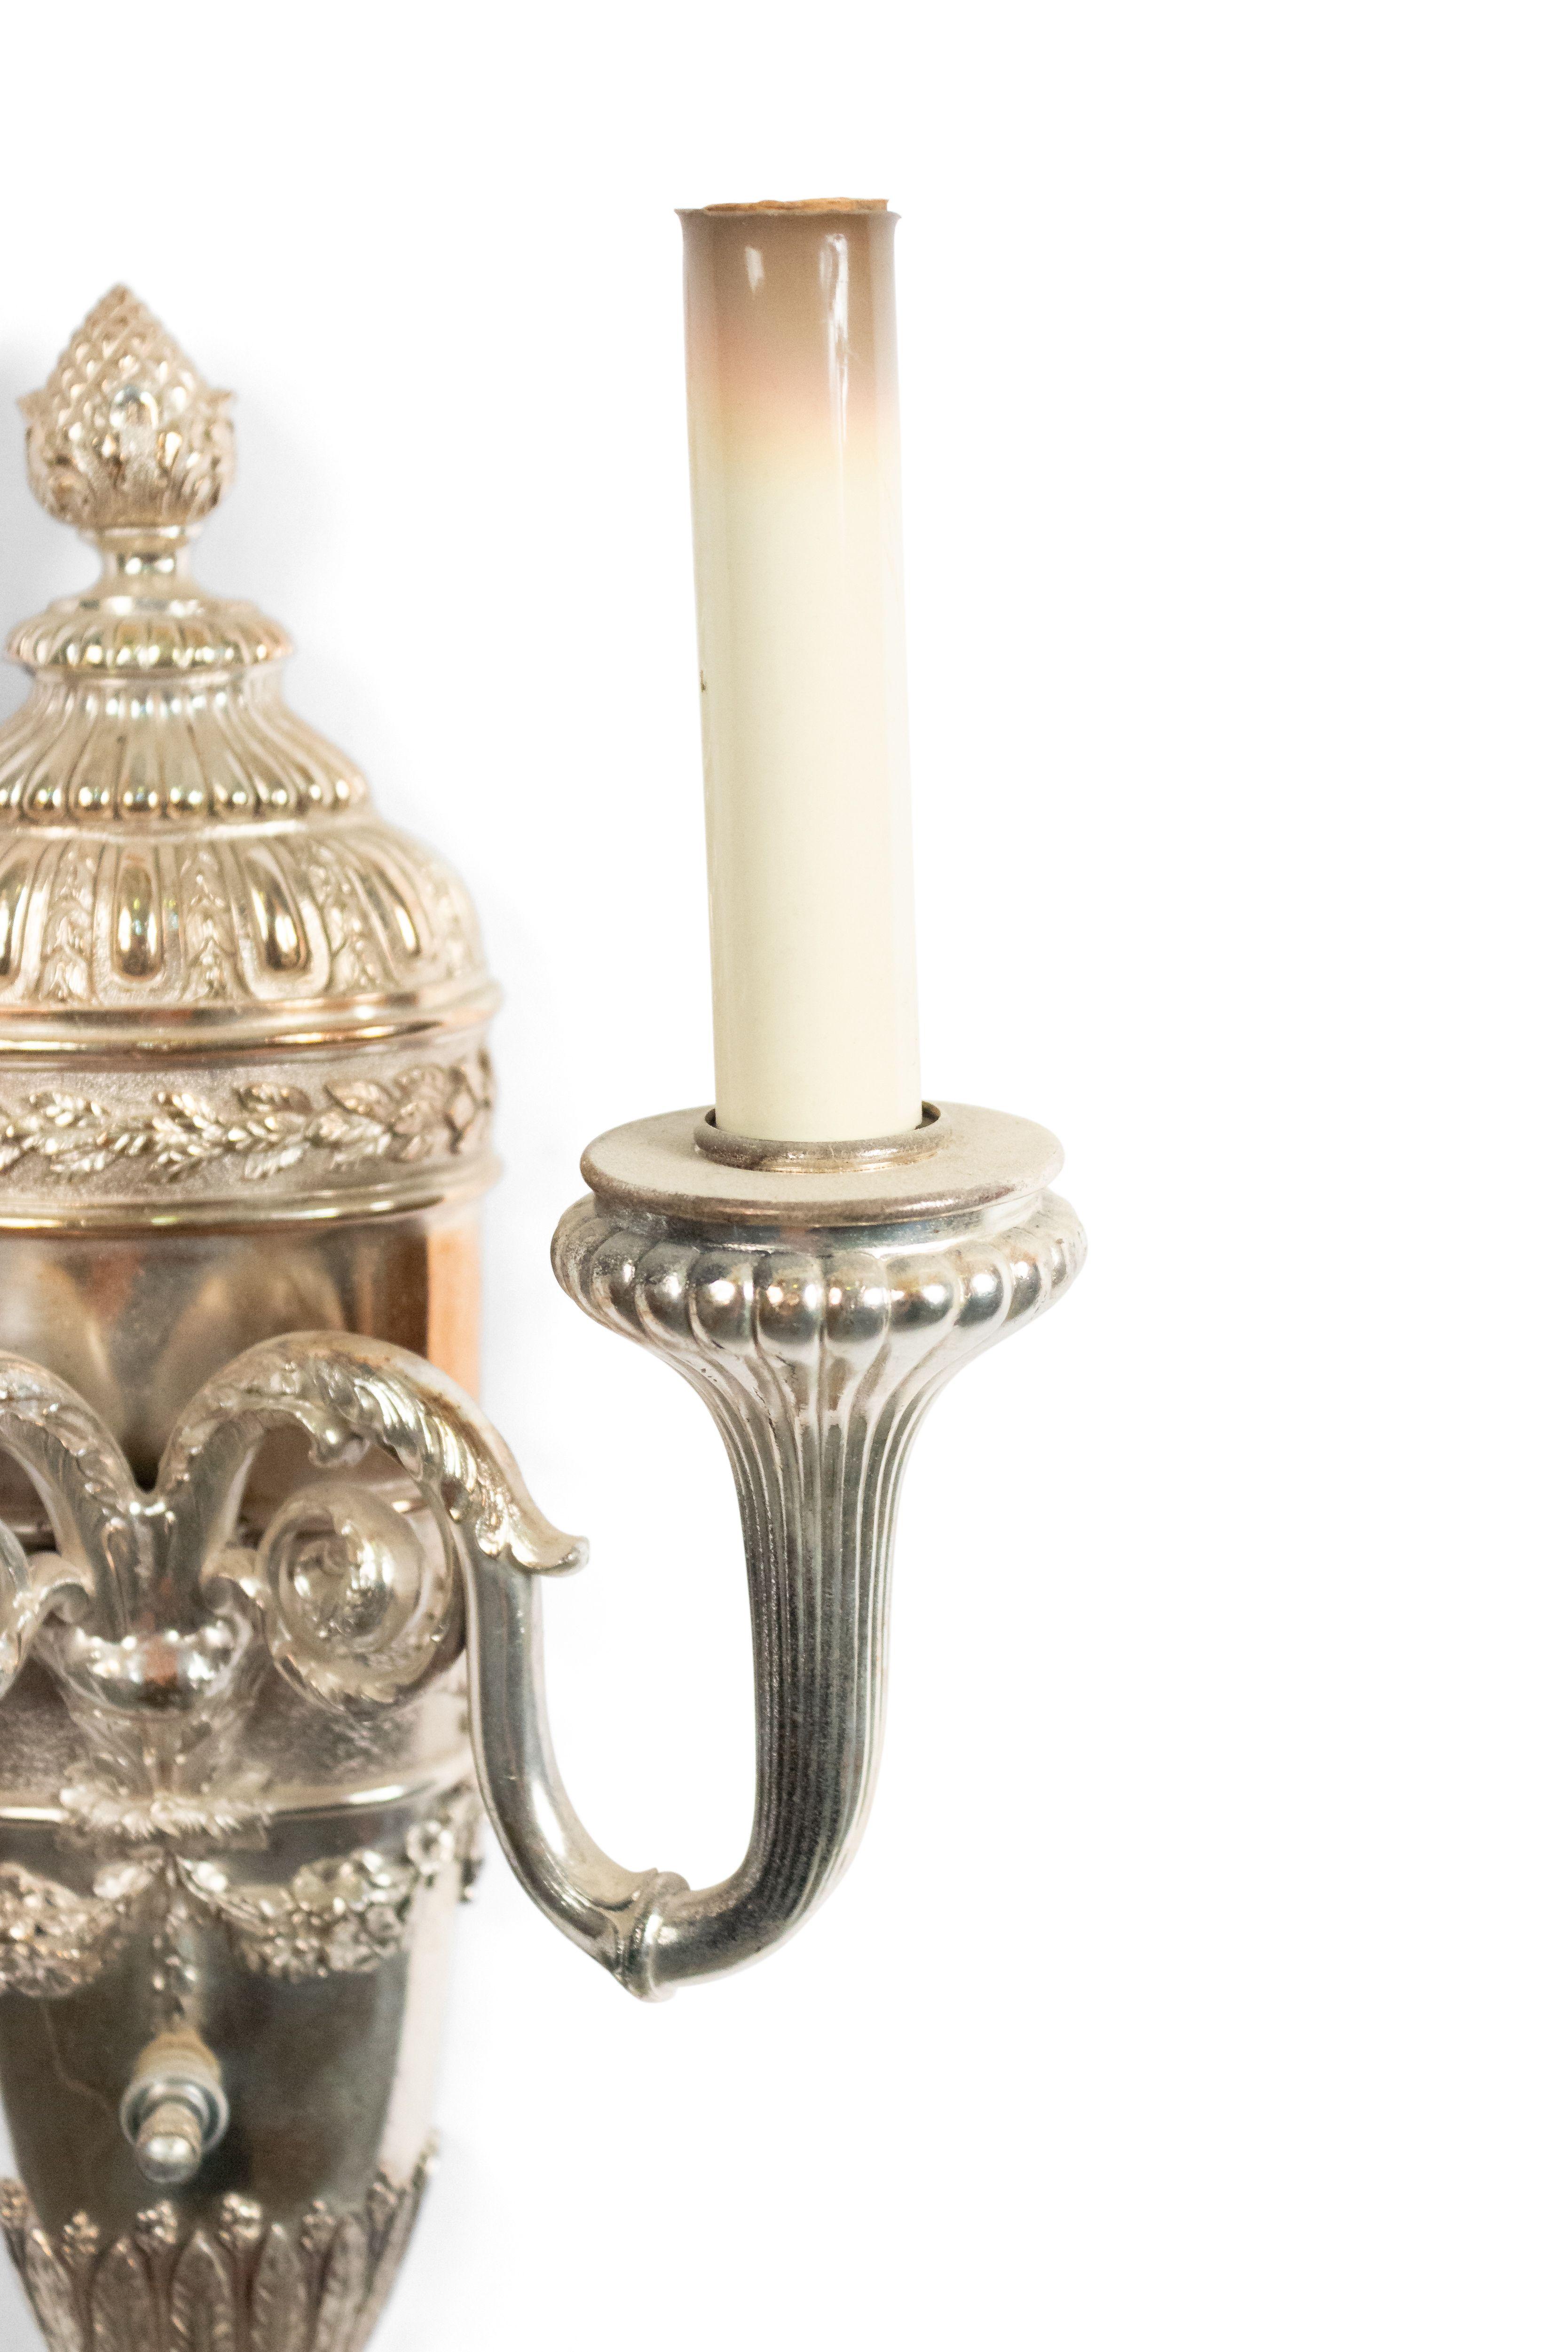 Pair of English Georgian style 19th century silver plate fluted arm wall sconces with acorn finial and swag and tassel at bottom.